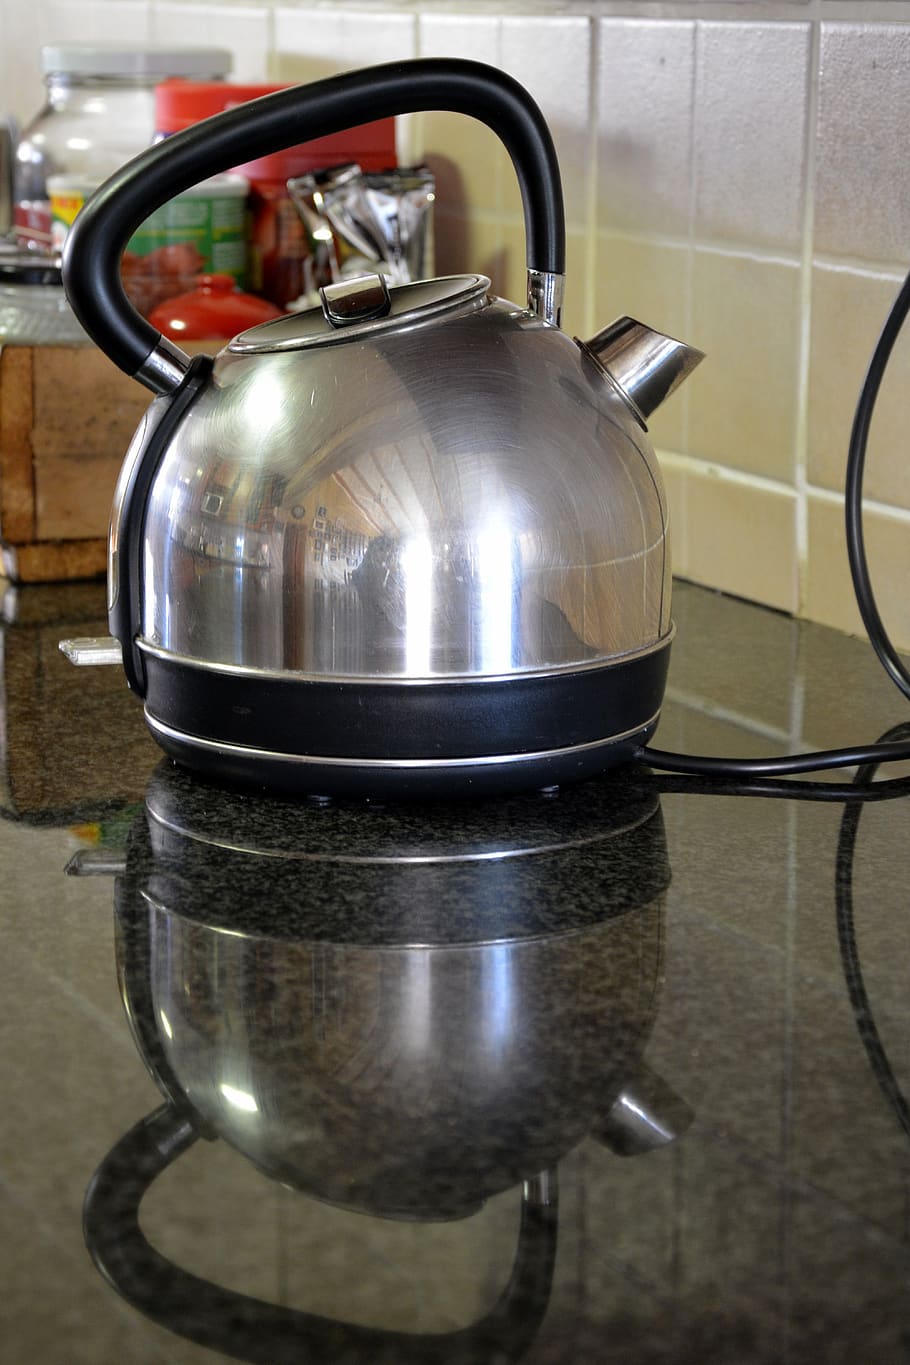 electric kettle, kitchenware, appliance, indoors, metal, household equipment, domestic room, kitchen, kitchen utensil, home